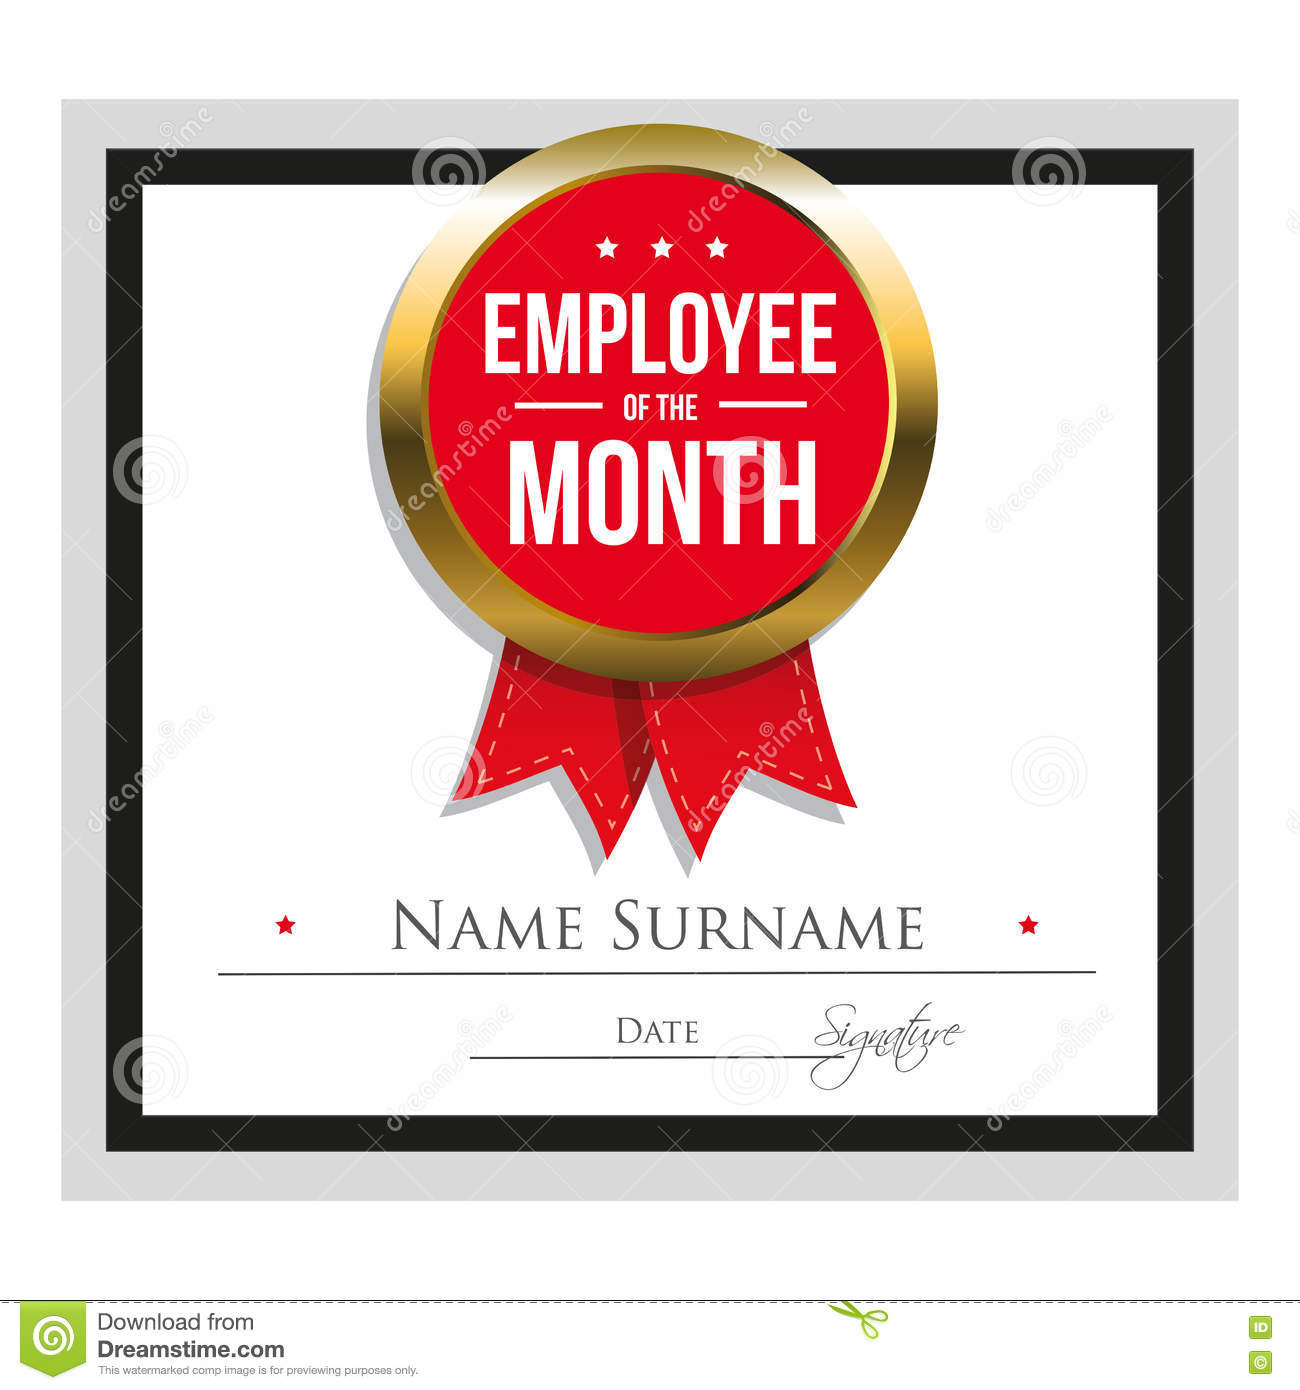 Employee Of The Month Certificate Template Stock Vector In Employee Of The Month Certificate Templates